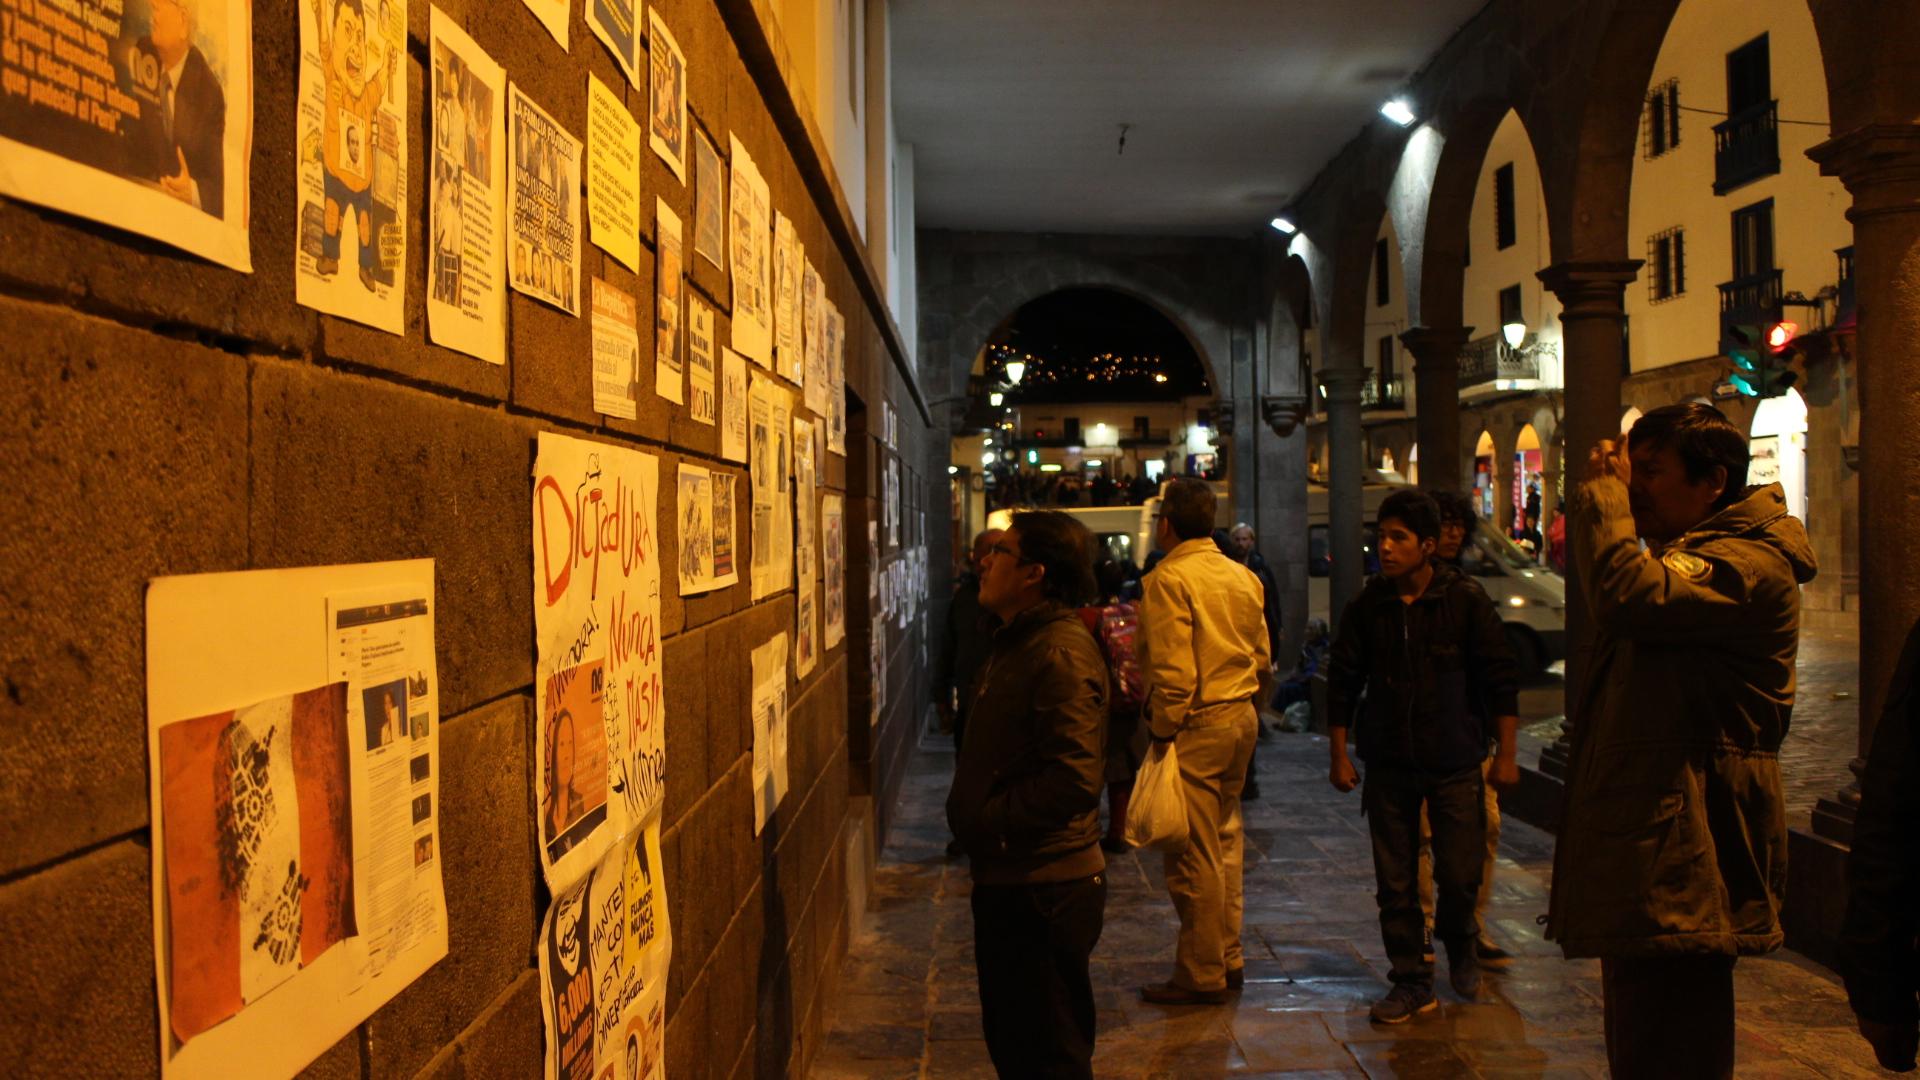 Onlookers read and photograph the wall in downtown Cuzco full of anti-Keiko Fujimori messages.